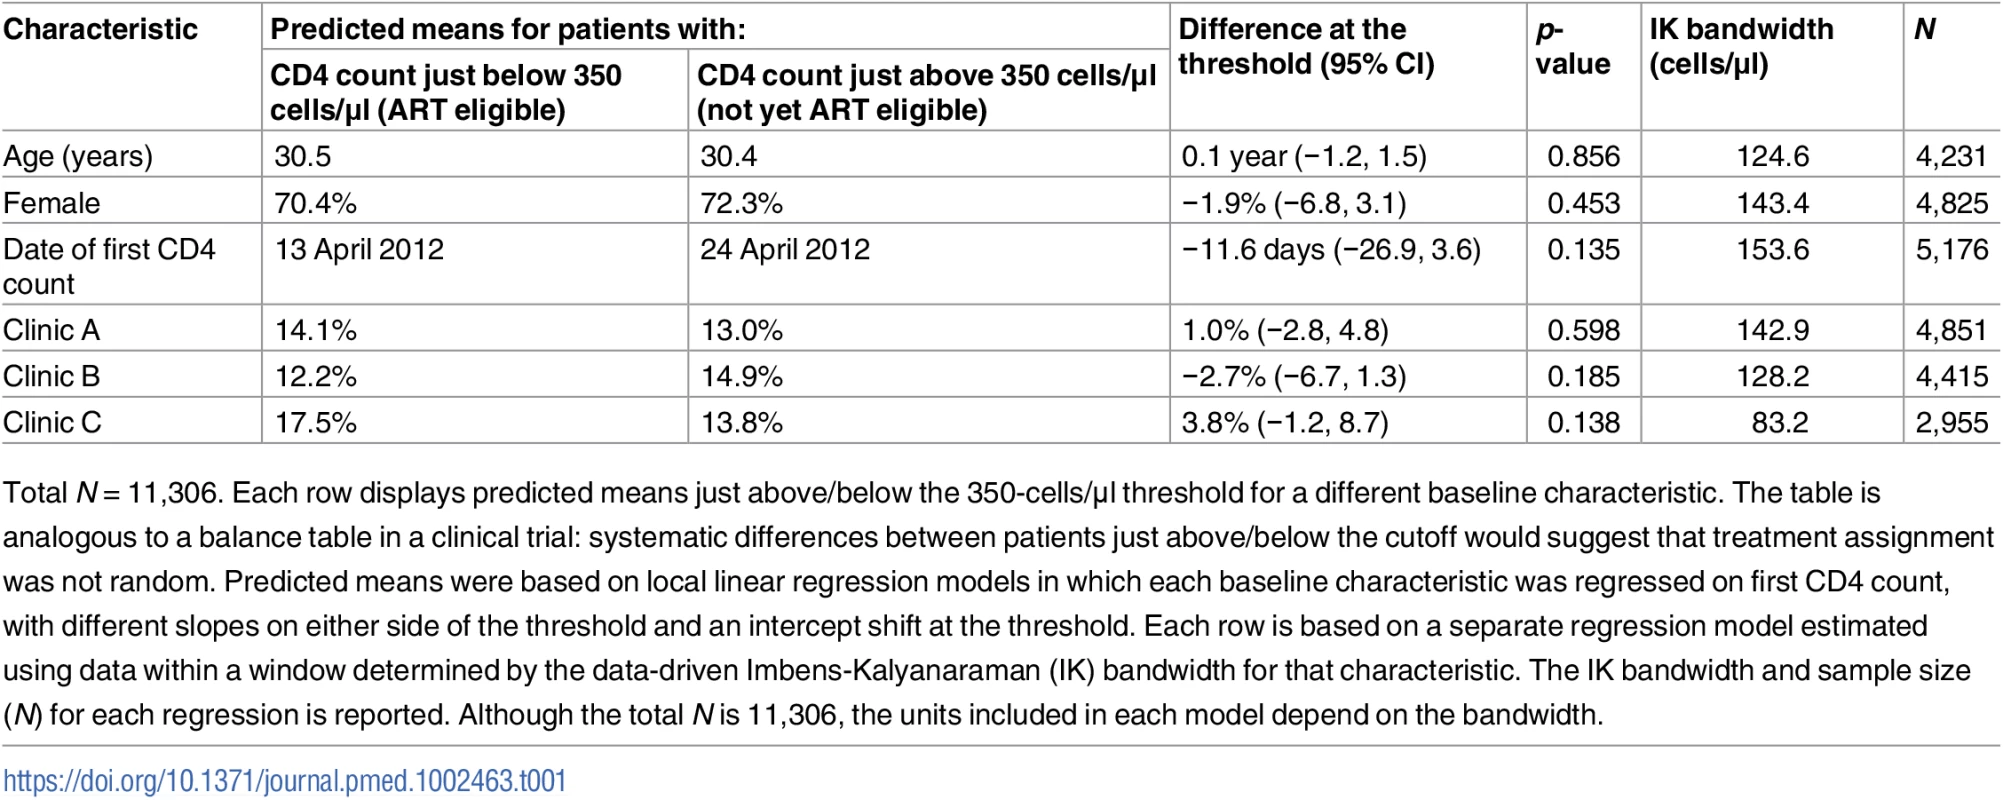 Balance in baseline characteristics of patients just above and below the 350-cells/μl CD4 count threshold.